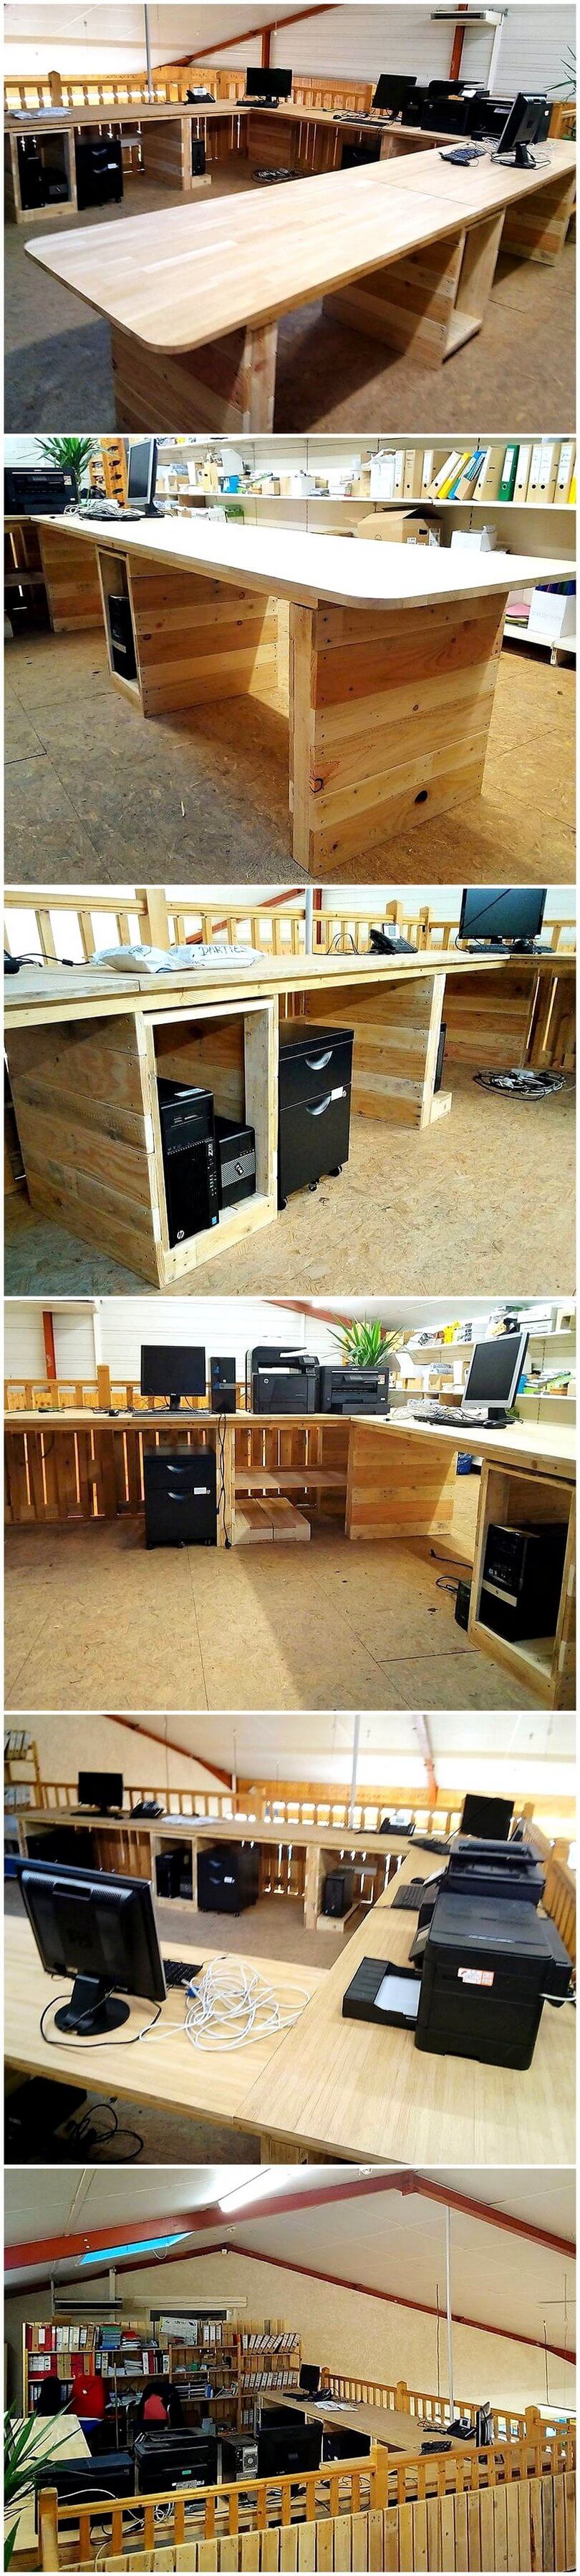 office furniture out of wood pallets